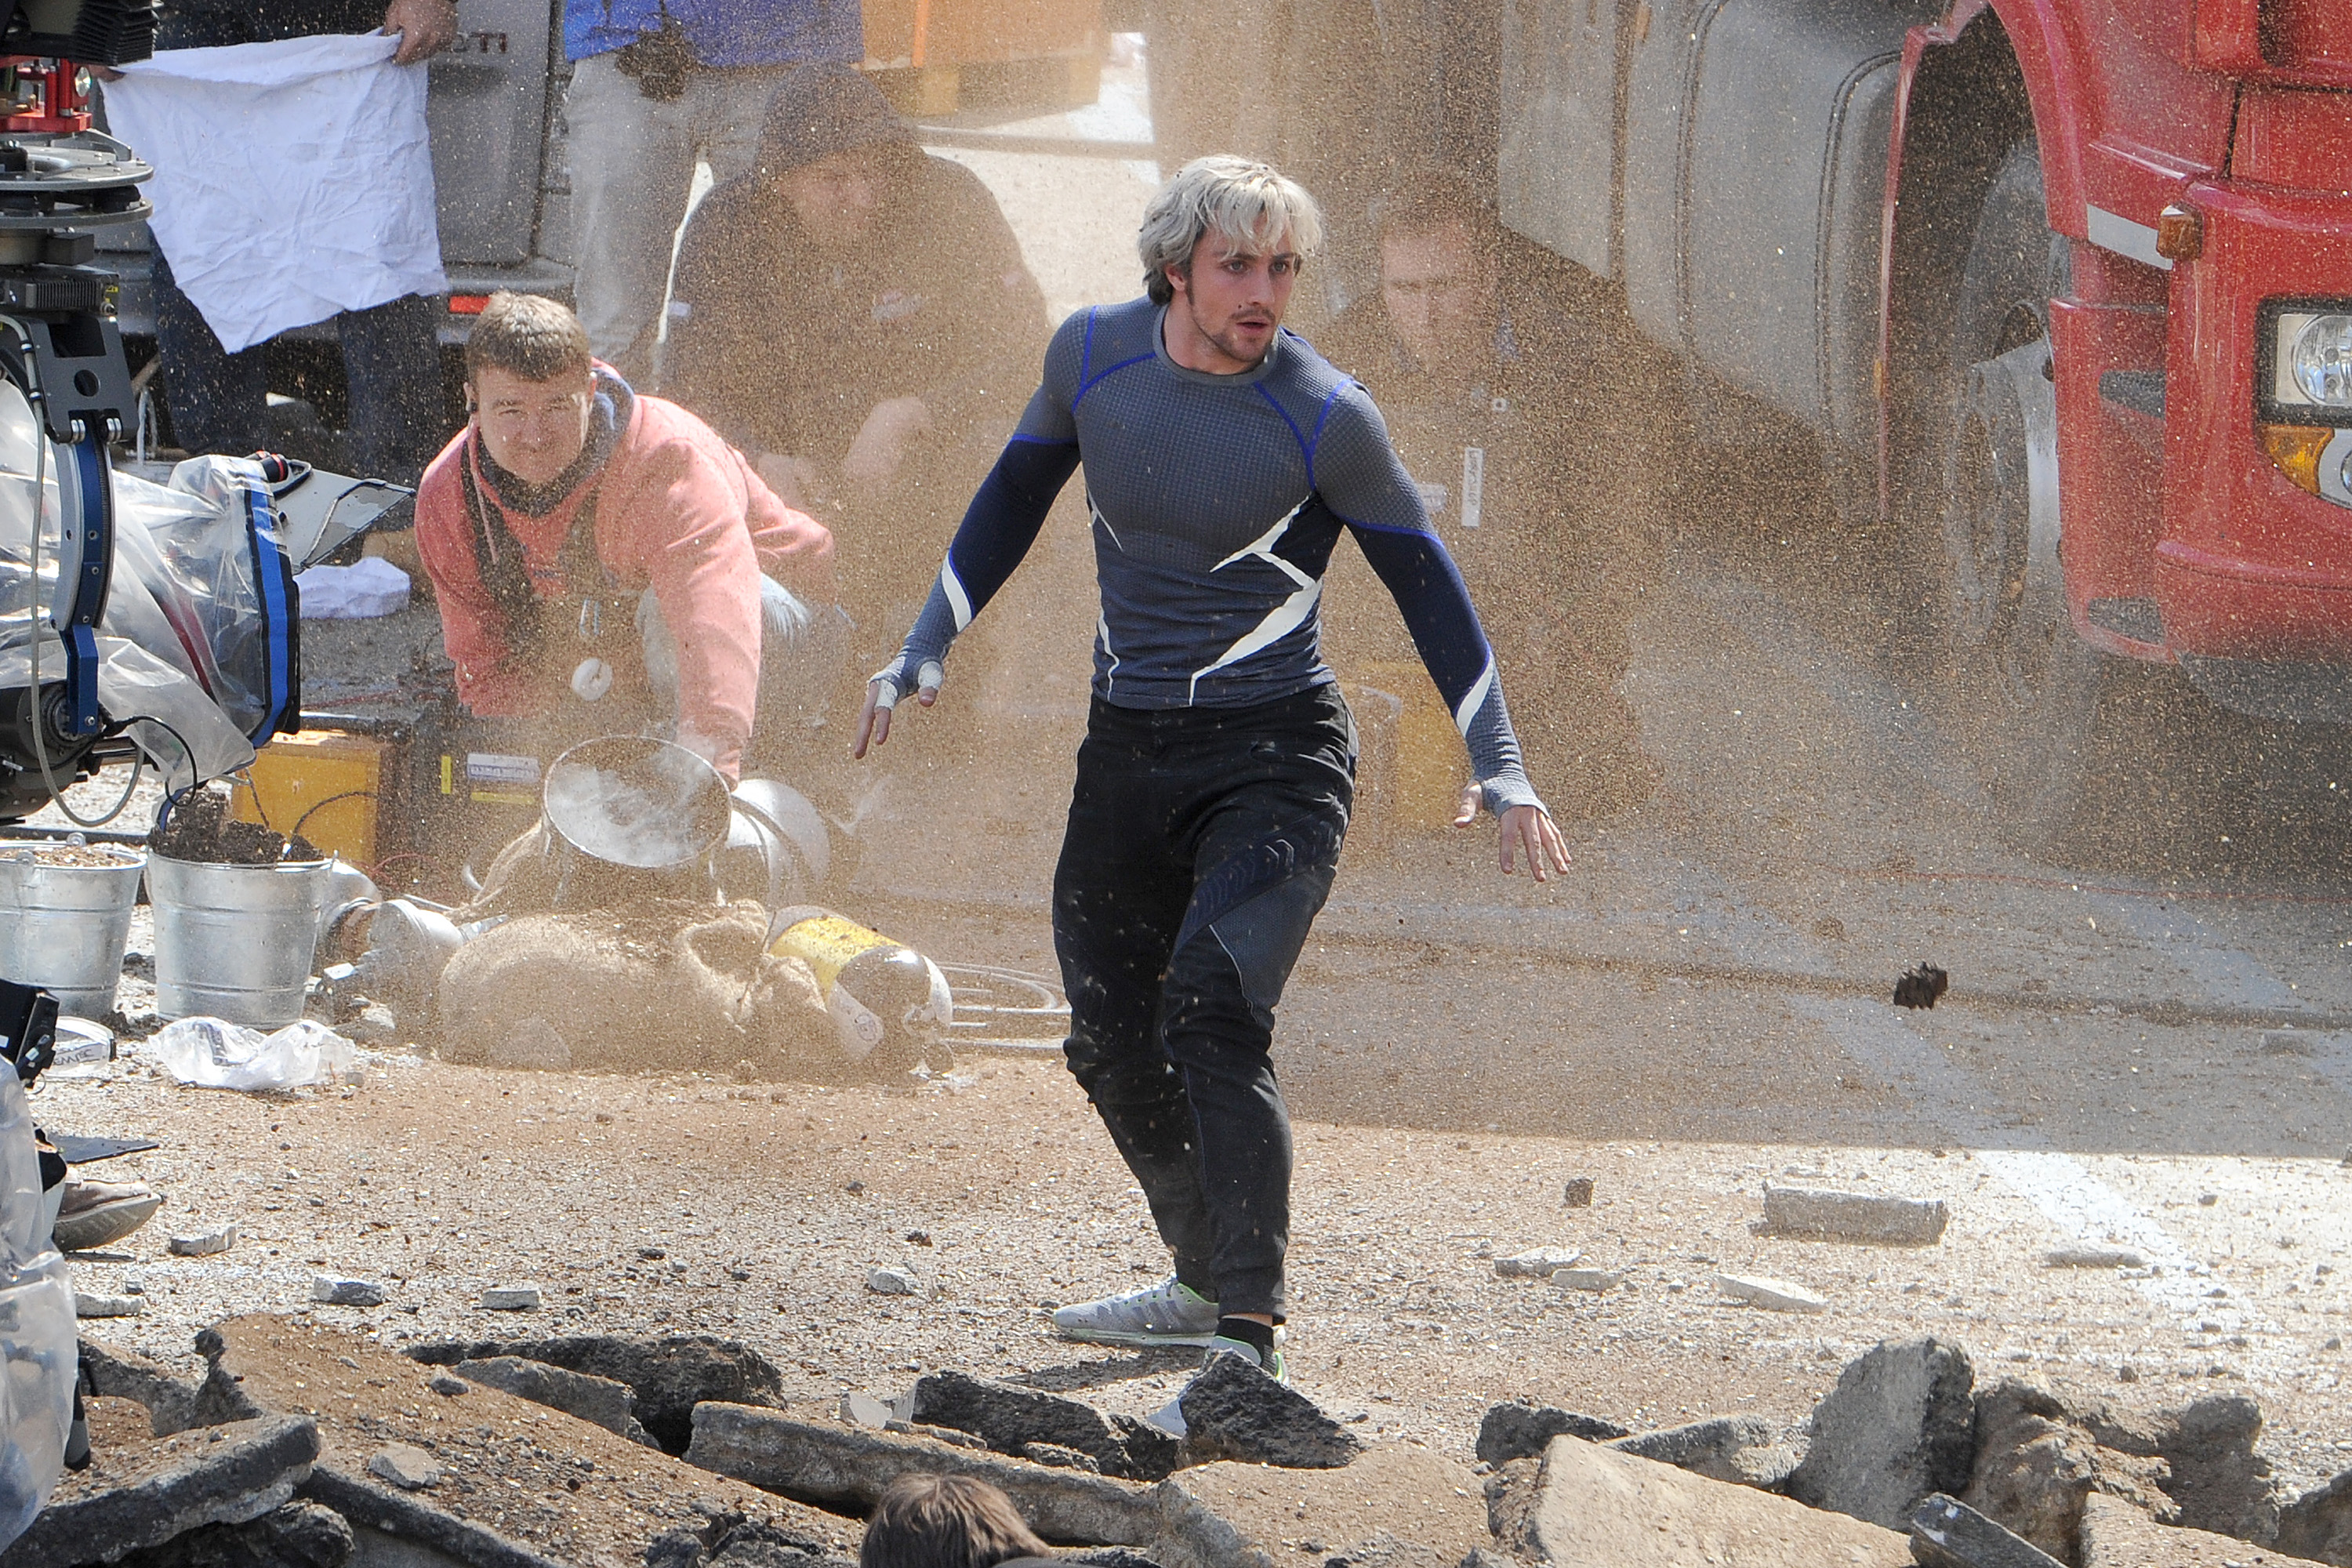 Quicksilver, is Scarlet Witch's twin brother and possesses superhuman speed.